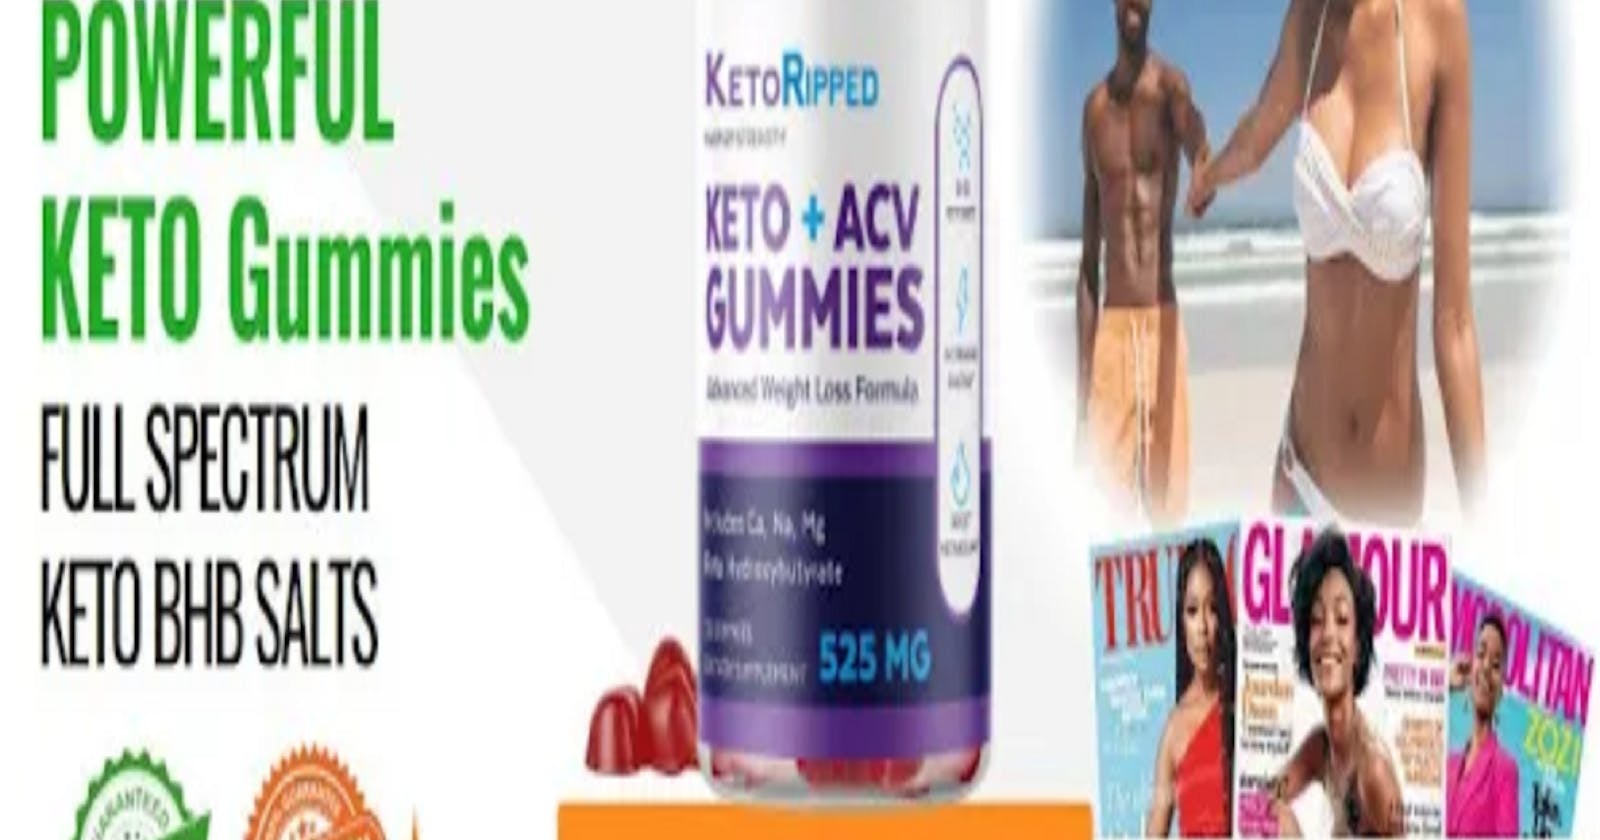 Keto Ripped ACV Gummies – Does It Really Works For Weight Loss? Update